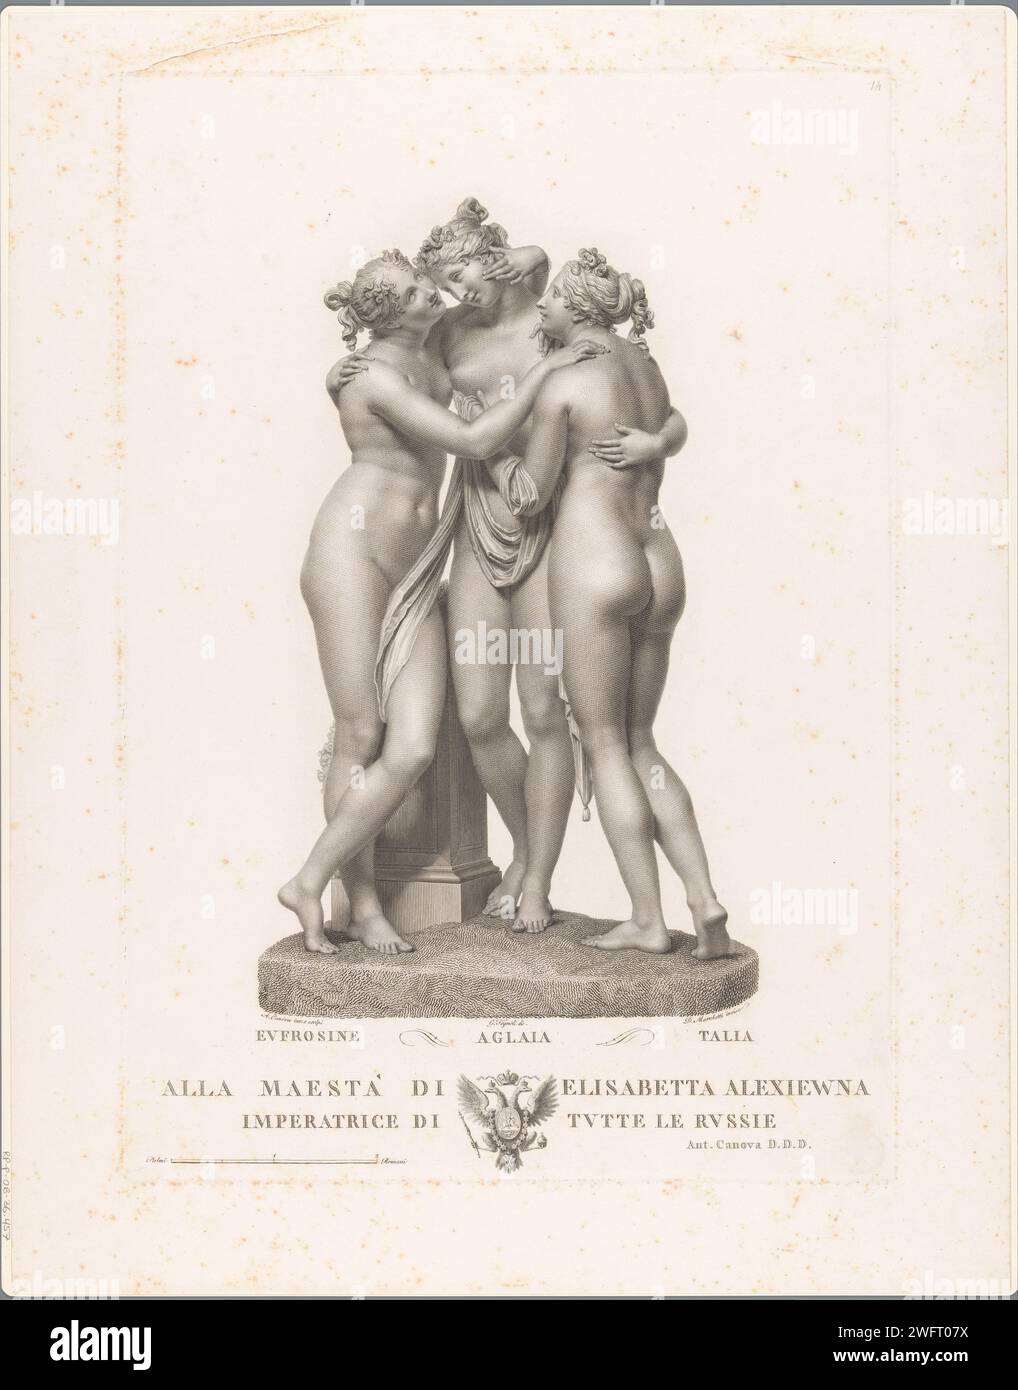 De Drie Gratiën, Domenico Marchetti, After Giovanni Tognolli, After Antonio Canova, 1814 - 1815 print Sculpture of the three graces (Talia, Aglaia and Eofrosine) by the Italian sculptor Antonio Canova. Assignment under the performance. Italy paper engraving / etching Thalia (one of the Graces). Euphrosyne (one of the Graces). Aglaia (one of the Graces). Graces (Charites), generally three in number; 'Gratie' (Ripa). piece of sculpture, reproduction of a piece of sculpture Stock Photo